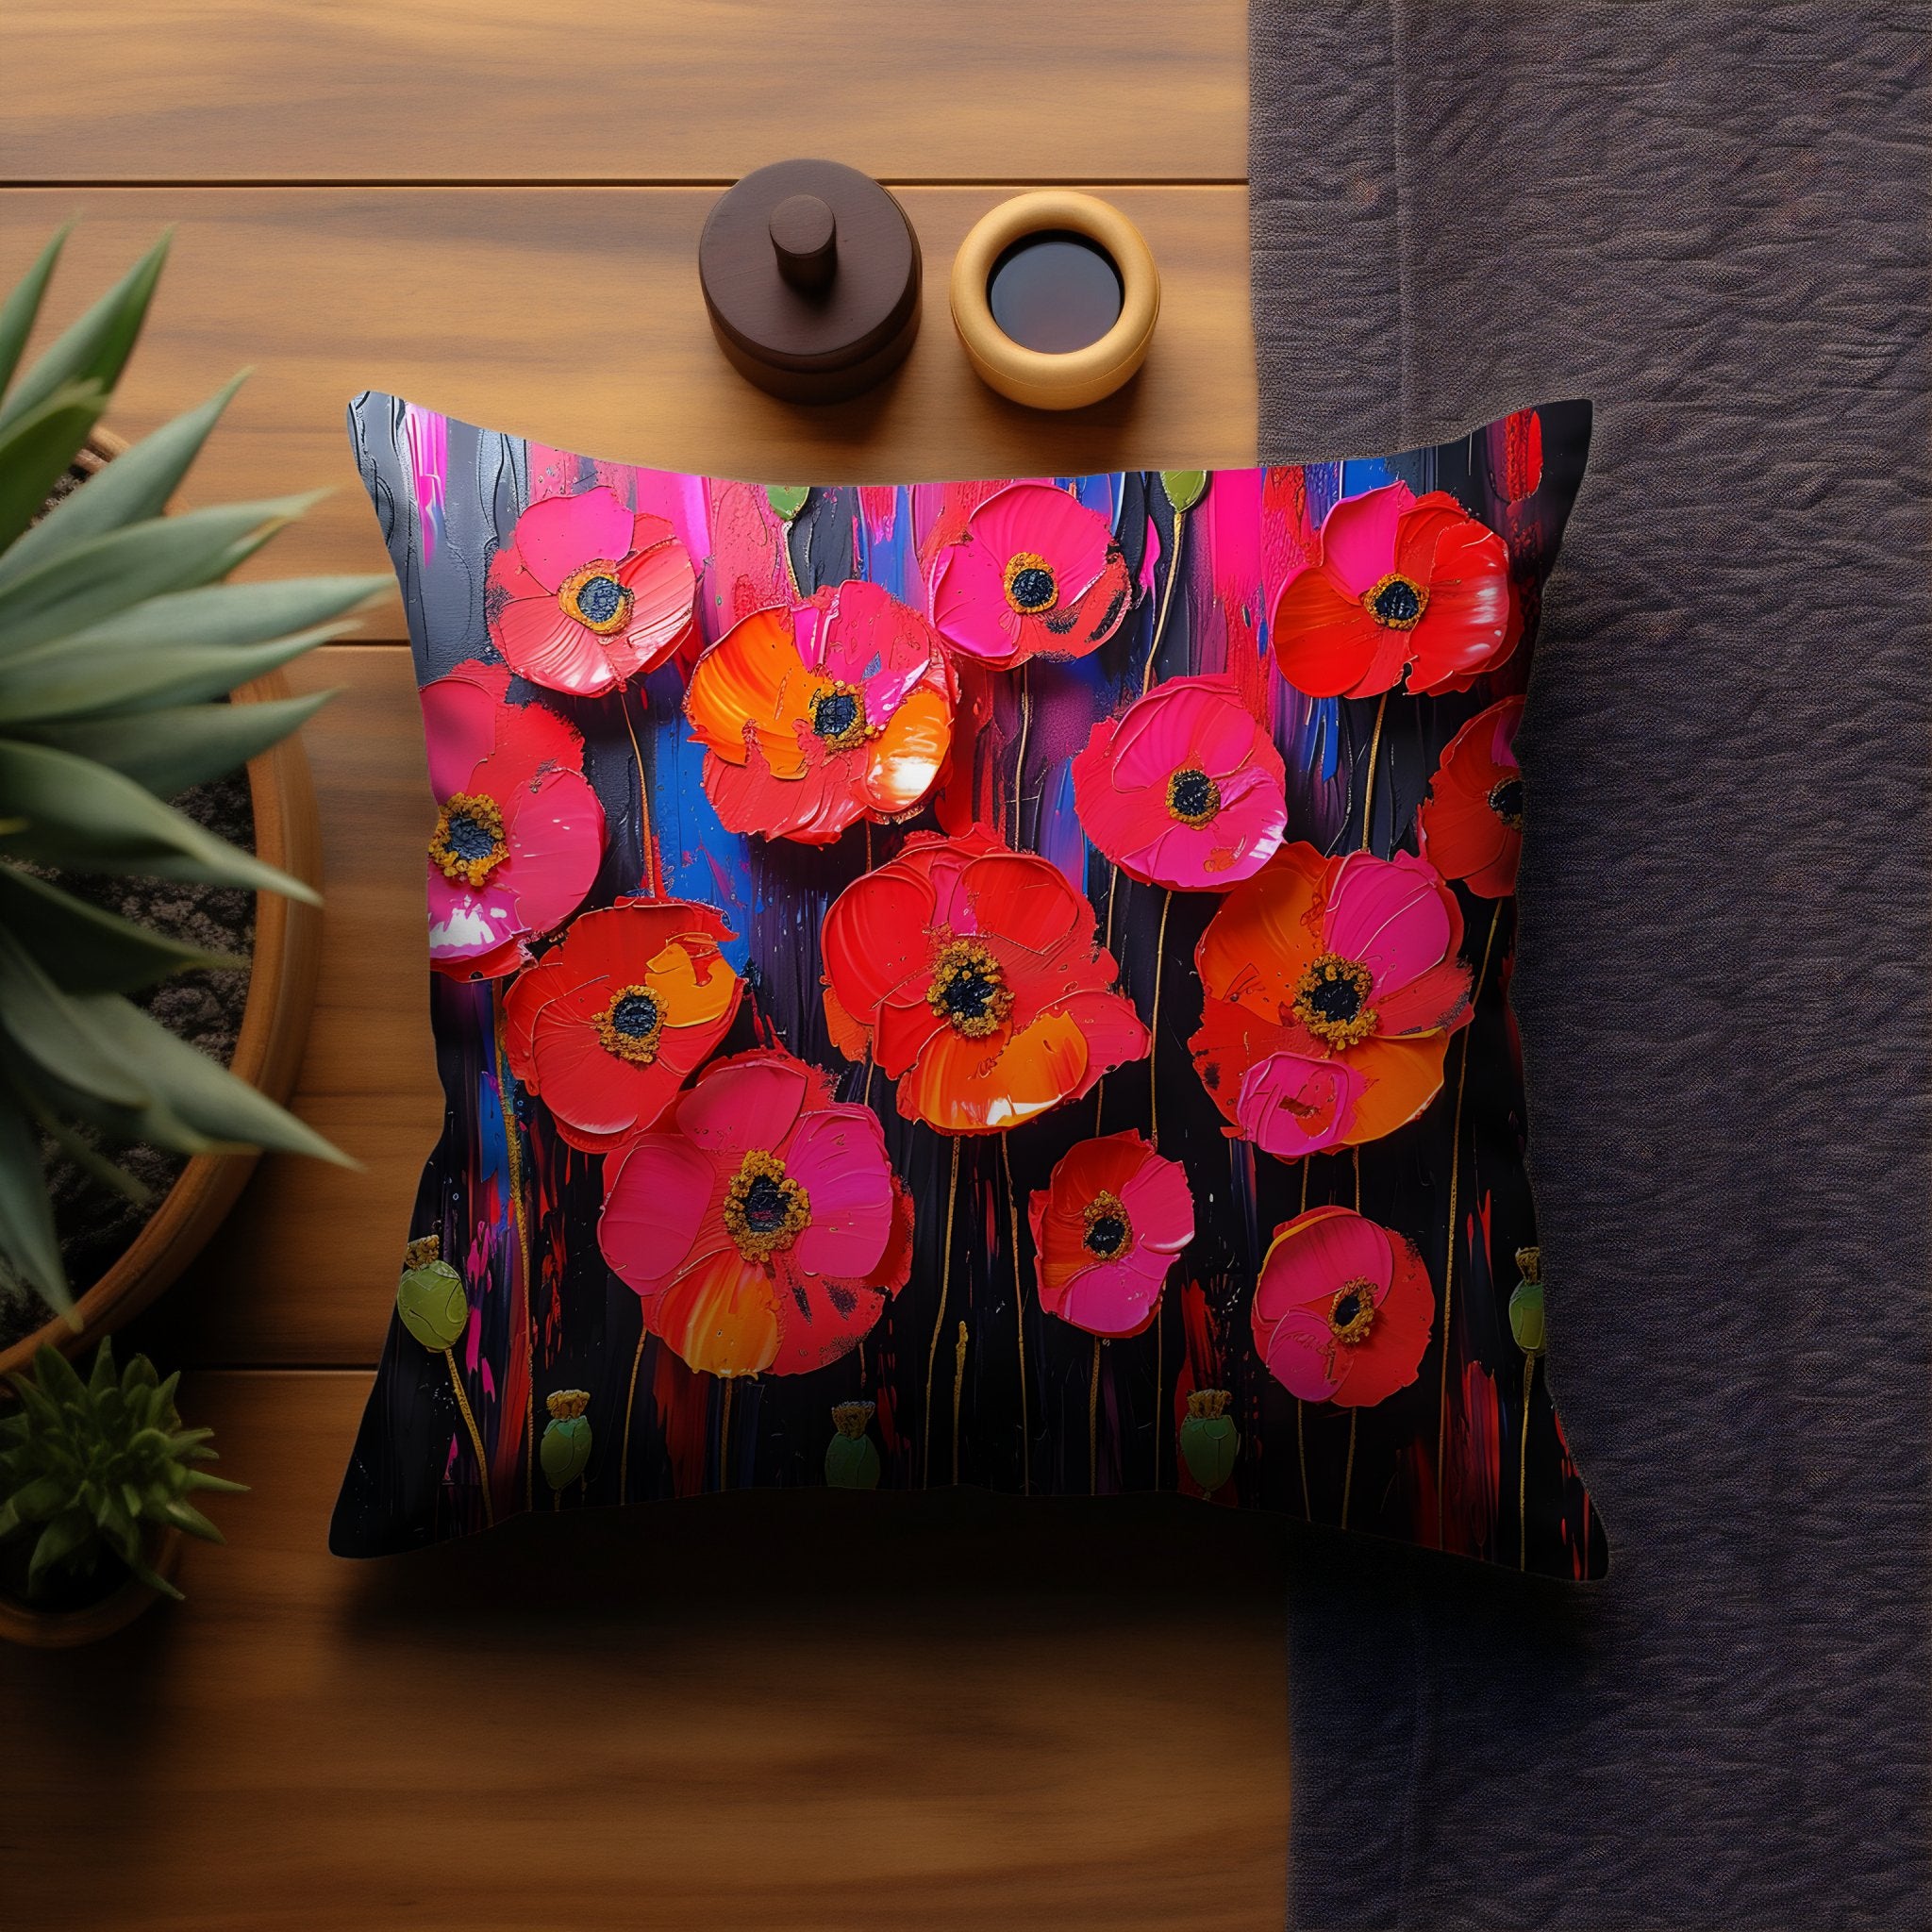 Poppies Paradise: Watercolor Poppies Decorative Pillow & Cover - My Store